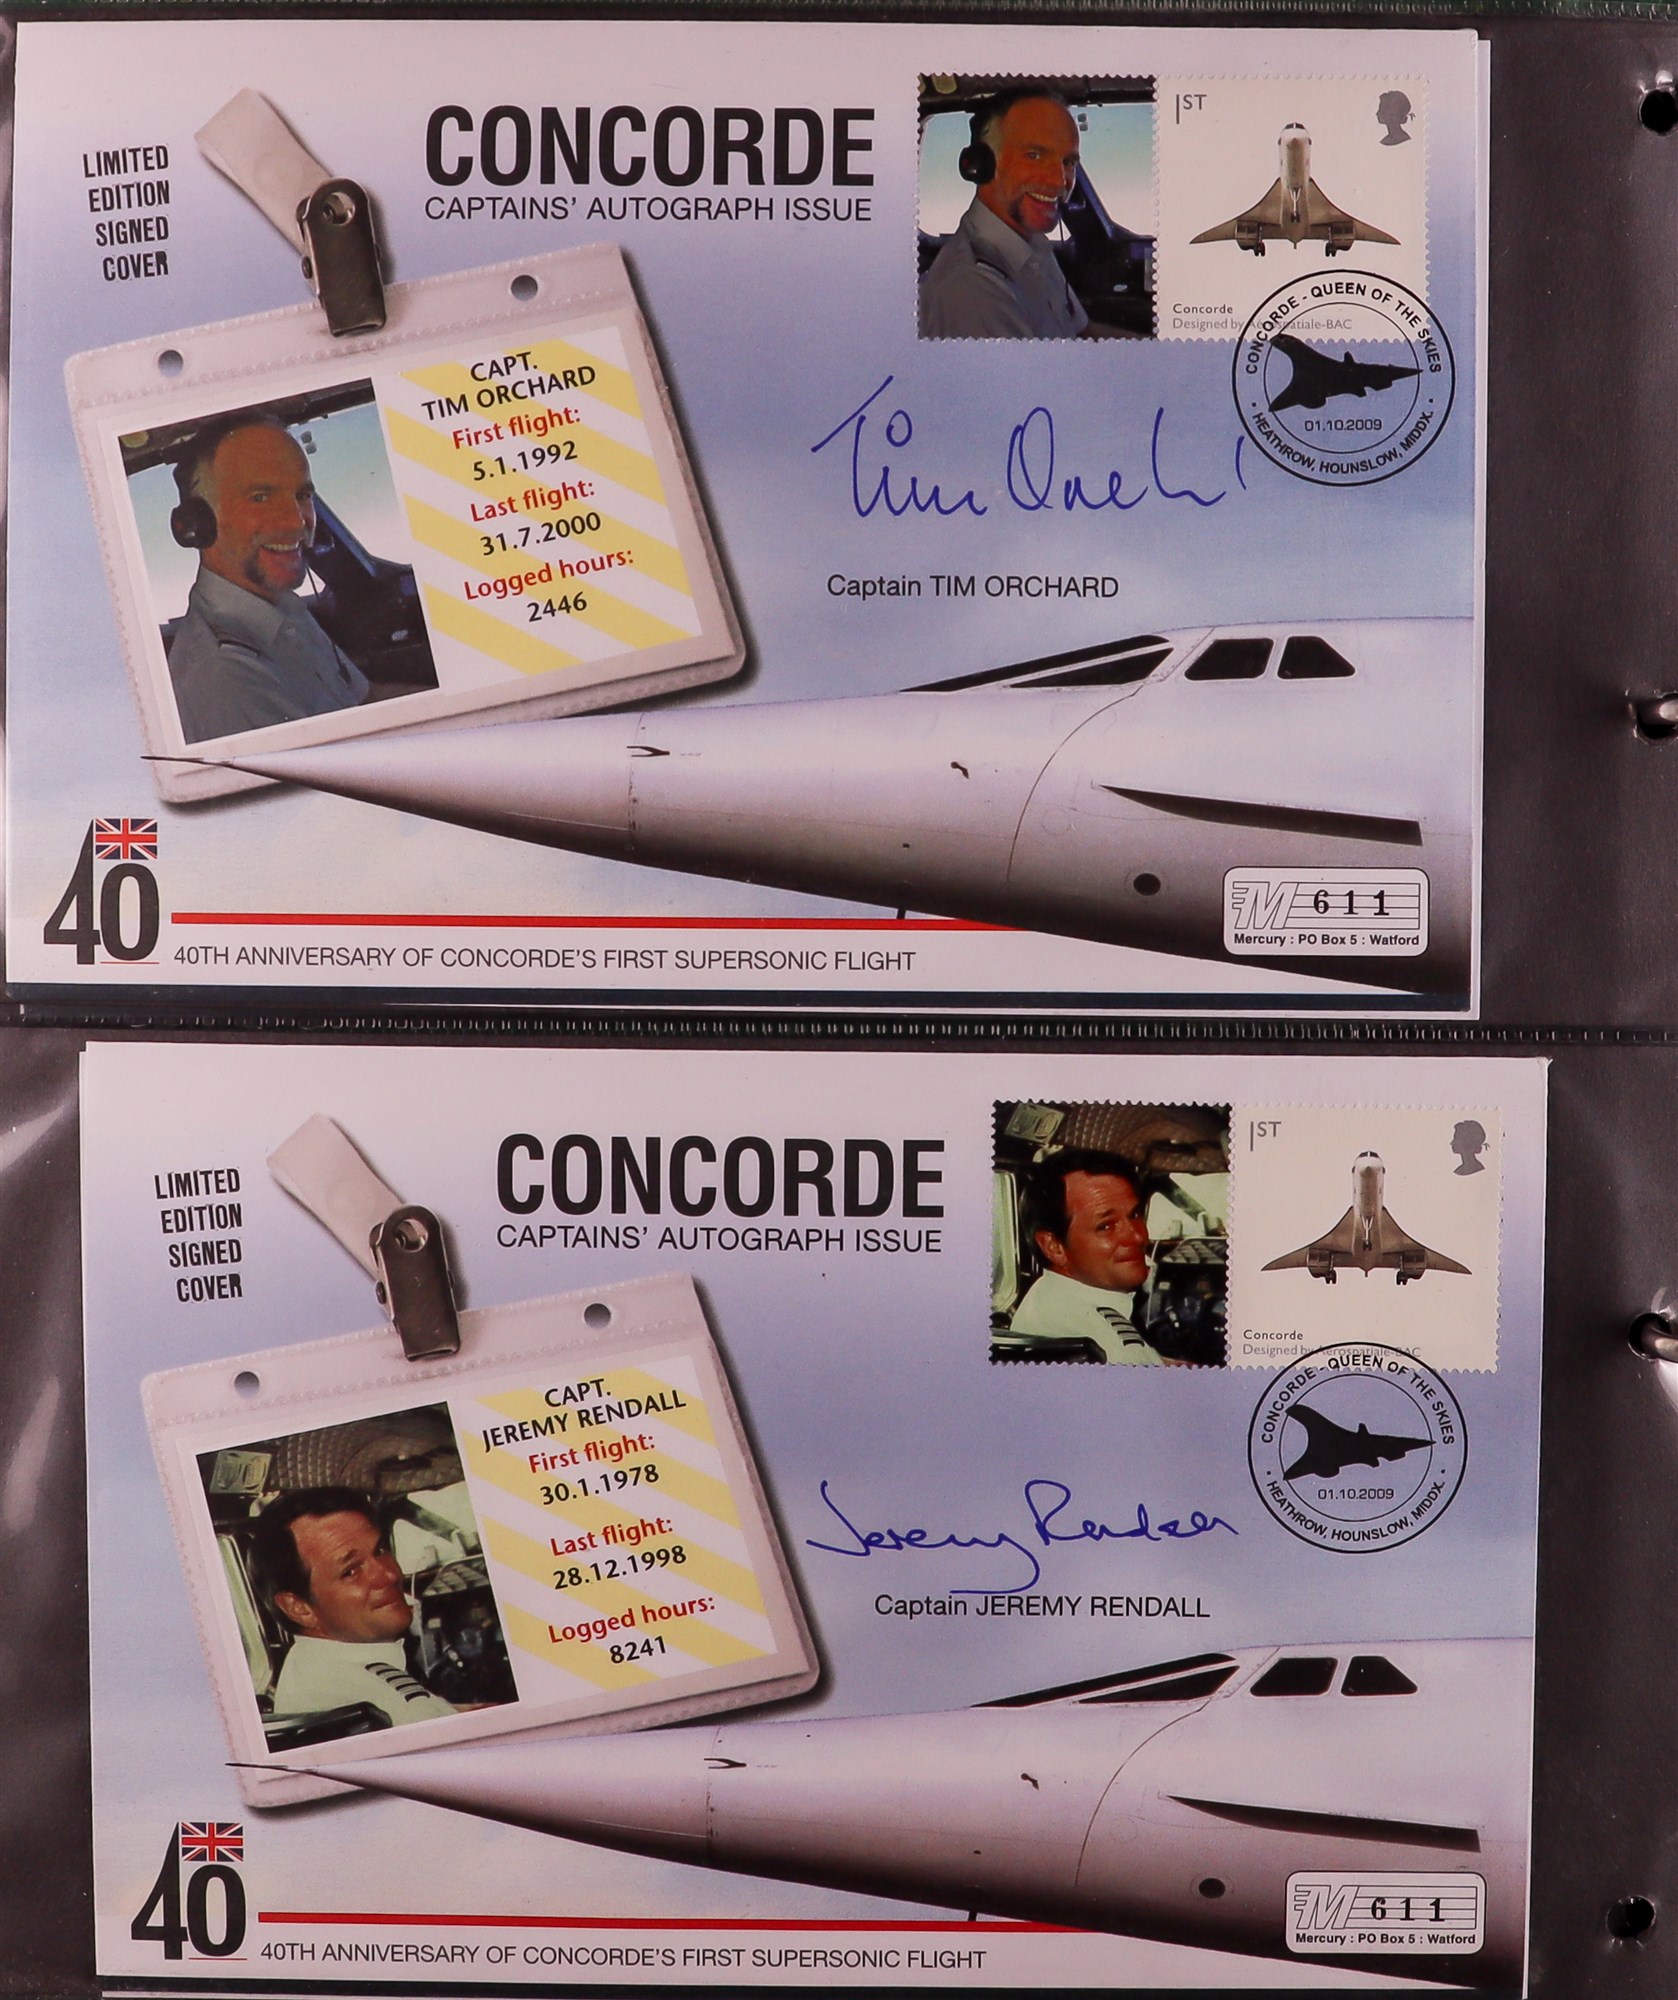 GB. COVERS & POSTAL HISTORY CONCORDE - AUTOGRAPHED COVERS collection of 16 items in binder, includes - Image 4 of 7